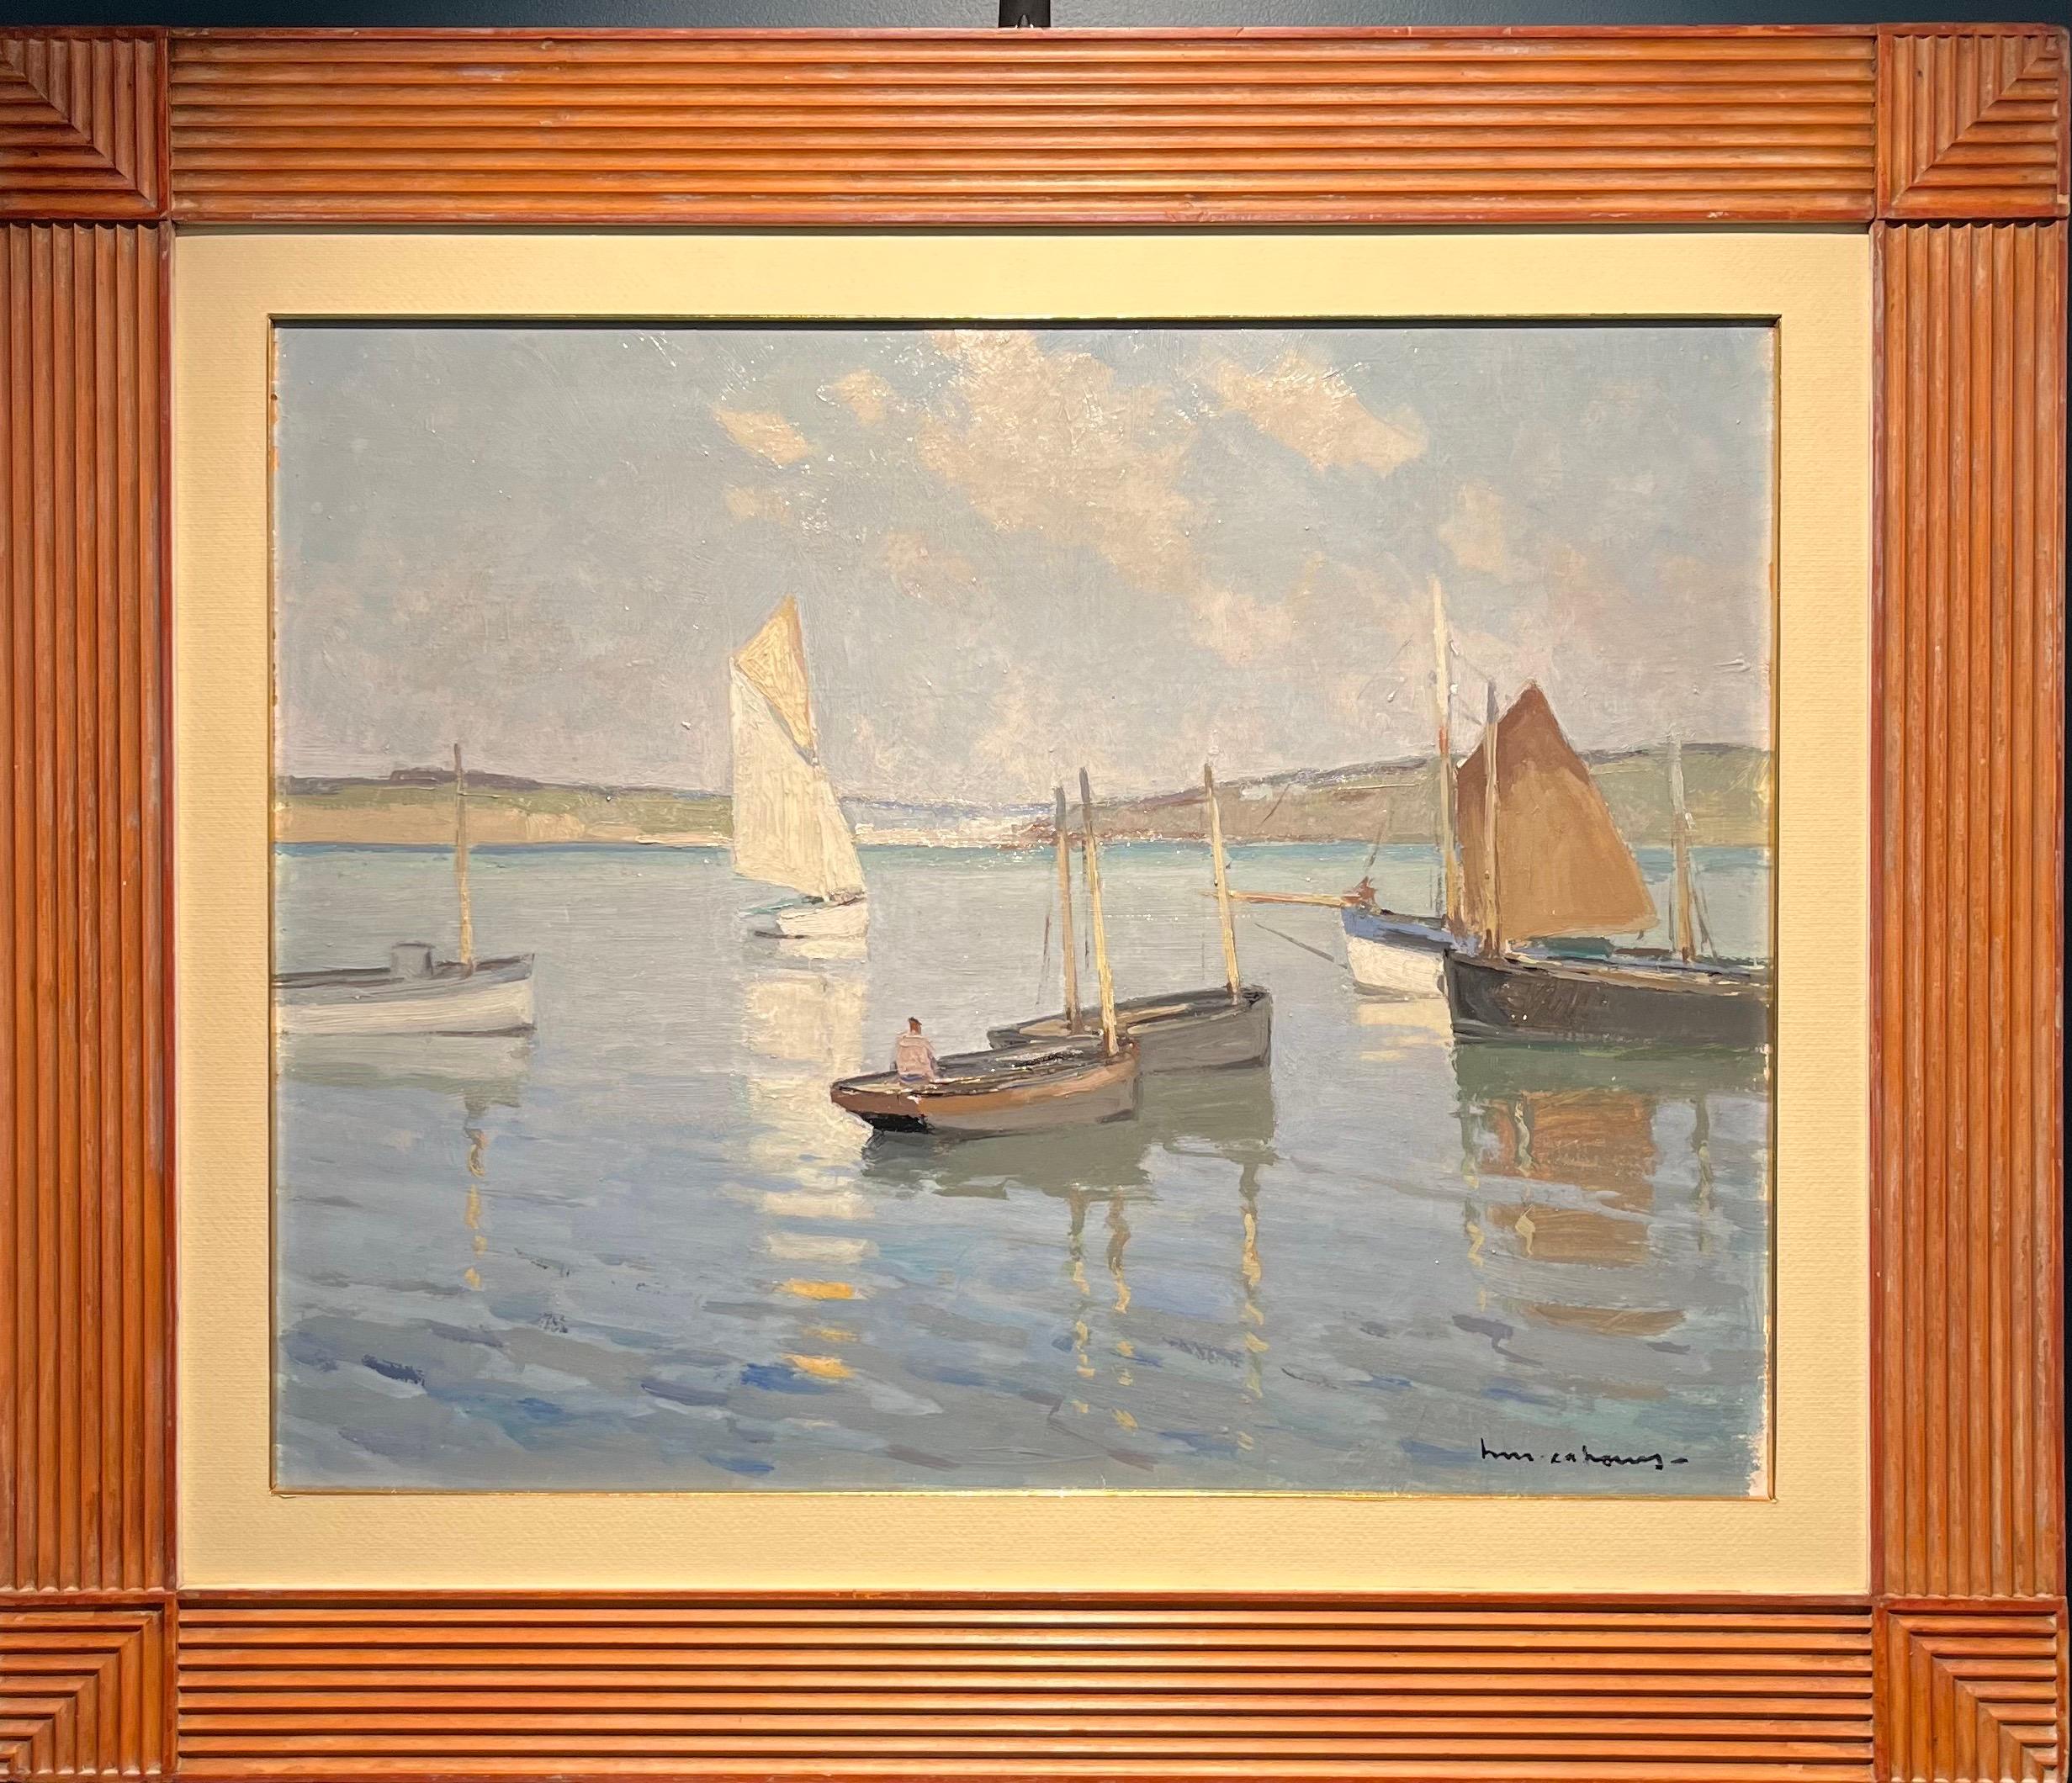 Henry Maurice CAHOURS Landscape Painting - "Sailboats in Brittany, France"Light Blue, Gray Oil cm. 65 x 54 1930